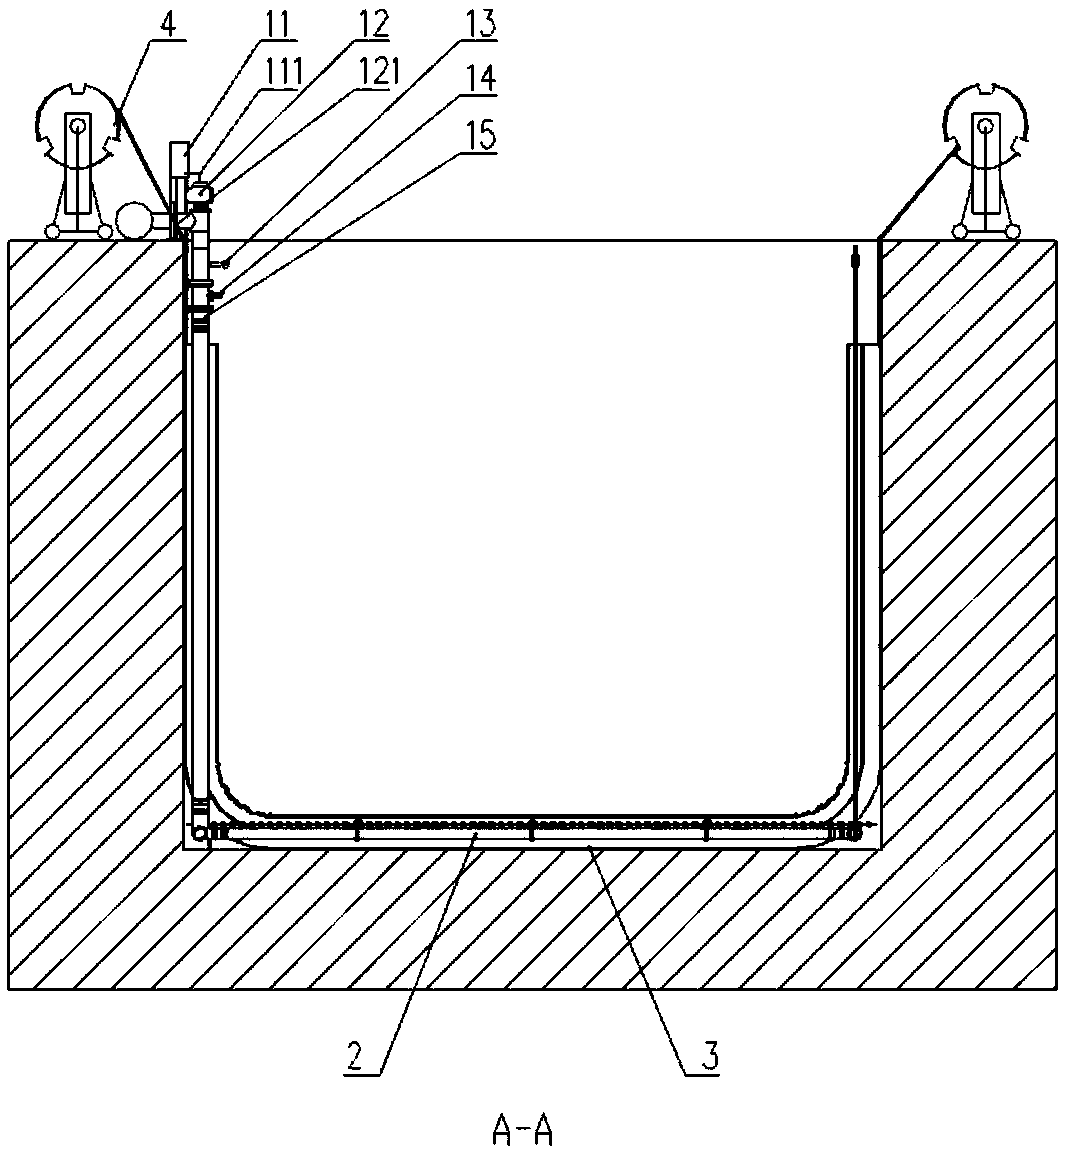 Lifting type self-controlled aeration system with multiple groups of rails